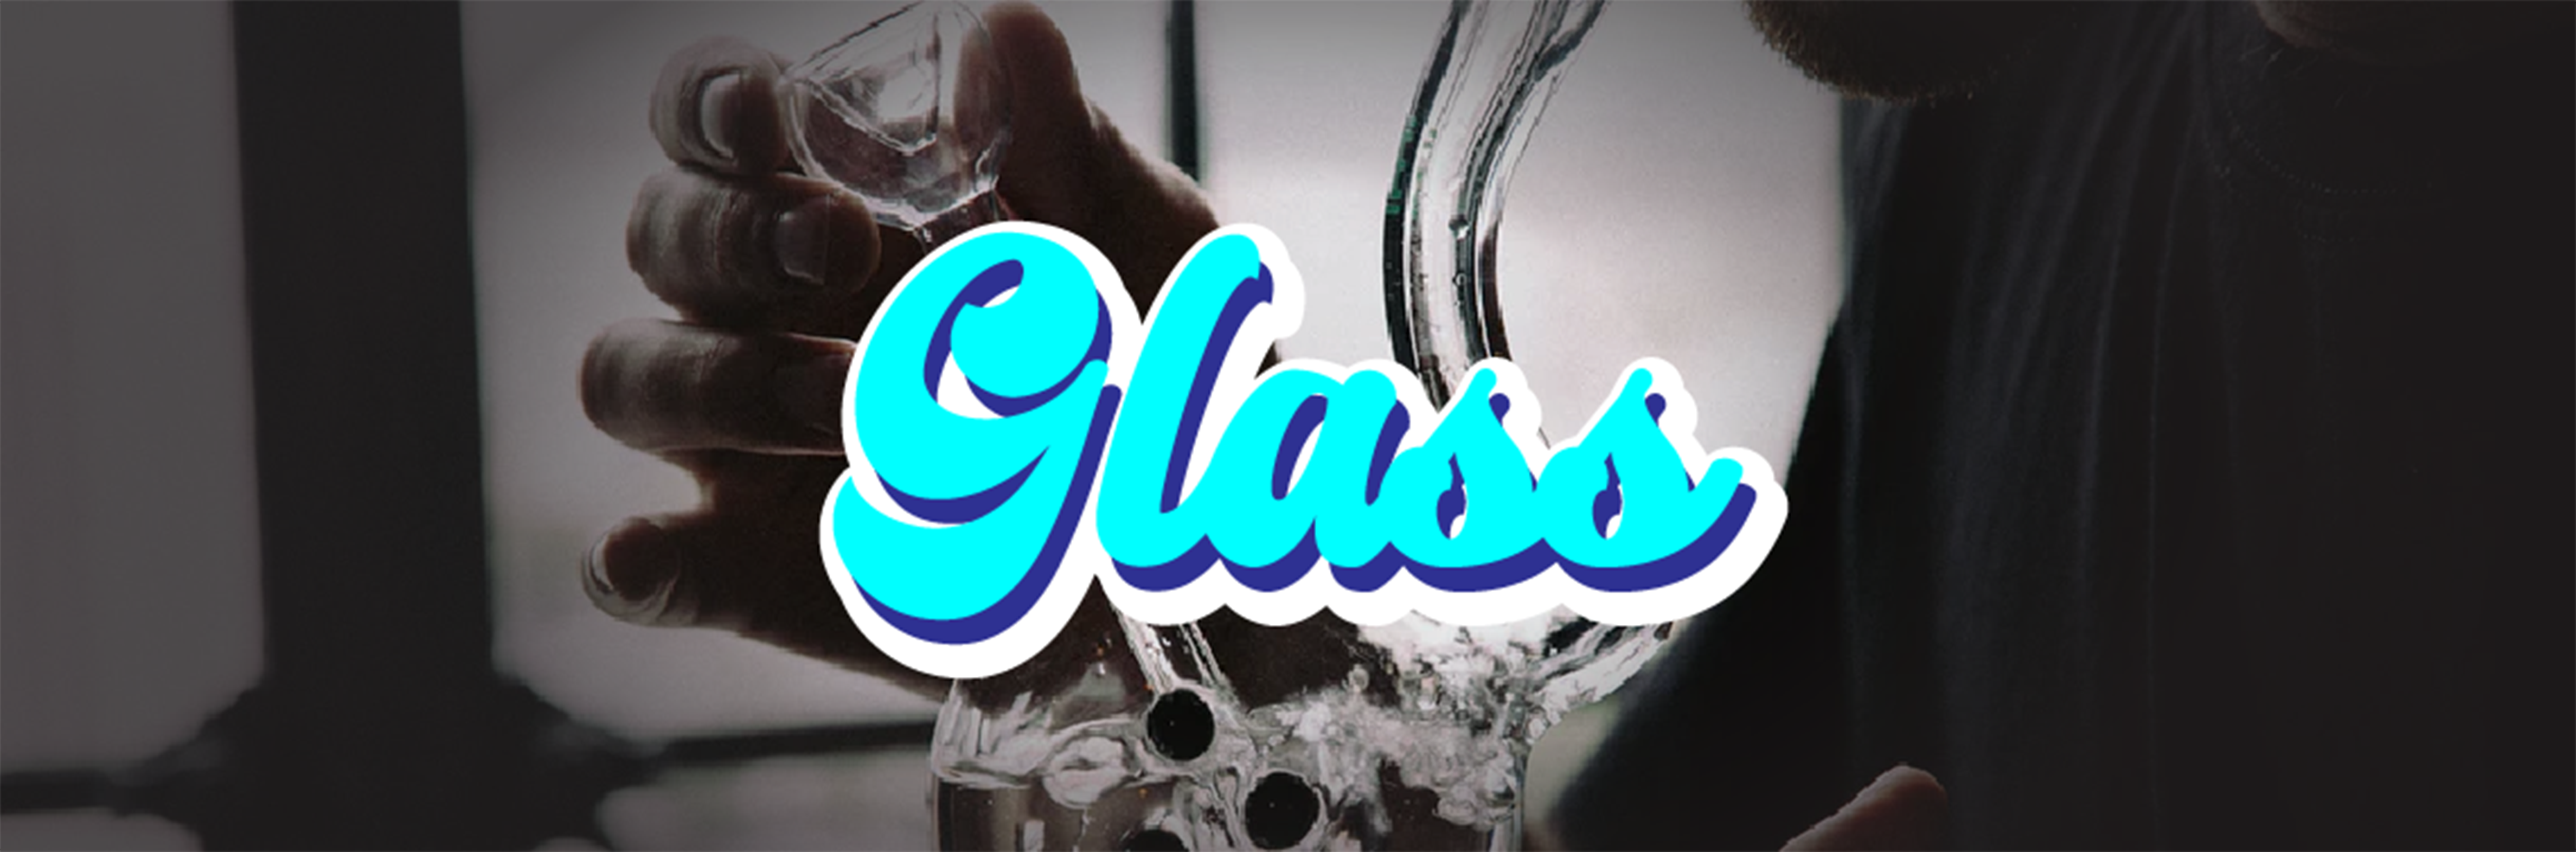 glass pipes in greenfield, water pipes in greenfield, vct in greenfield